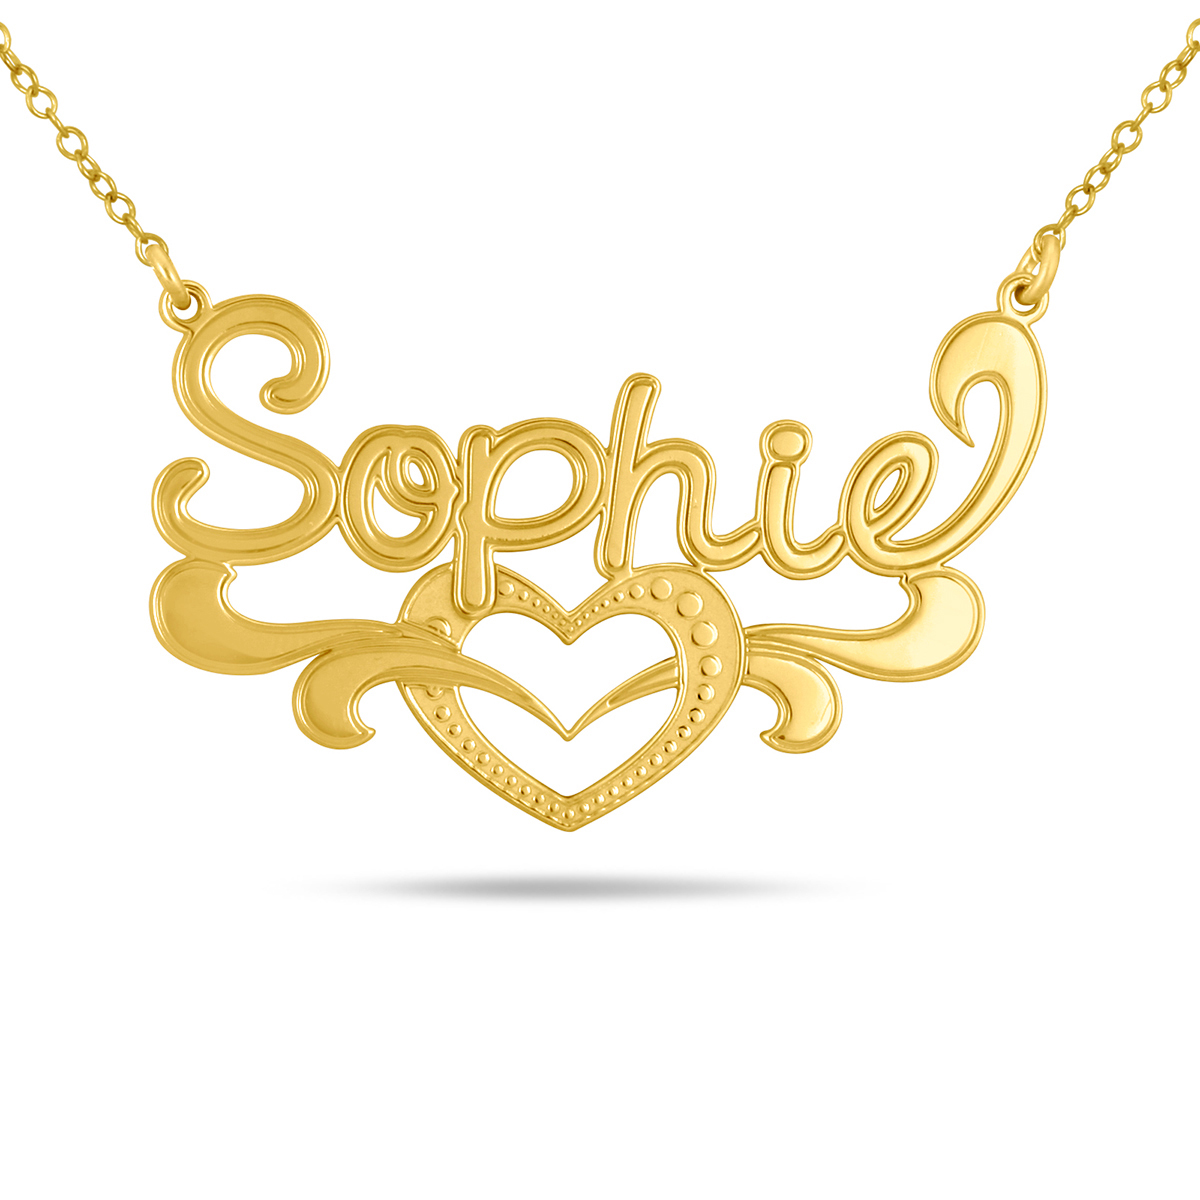 Custom Name Heart Pendant Necklace in 24K Gold Plated Sterling Silver